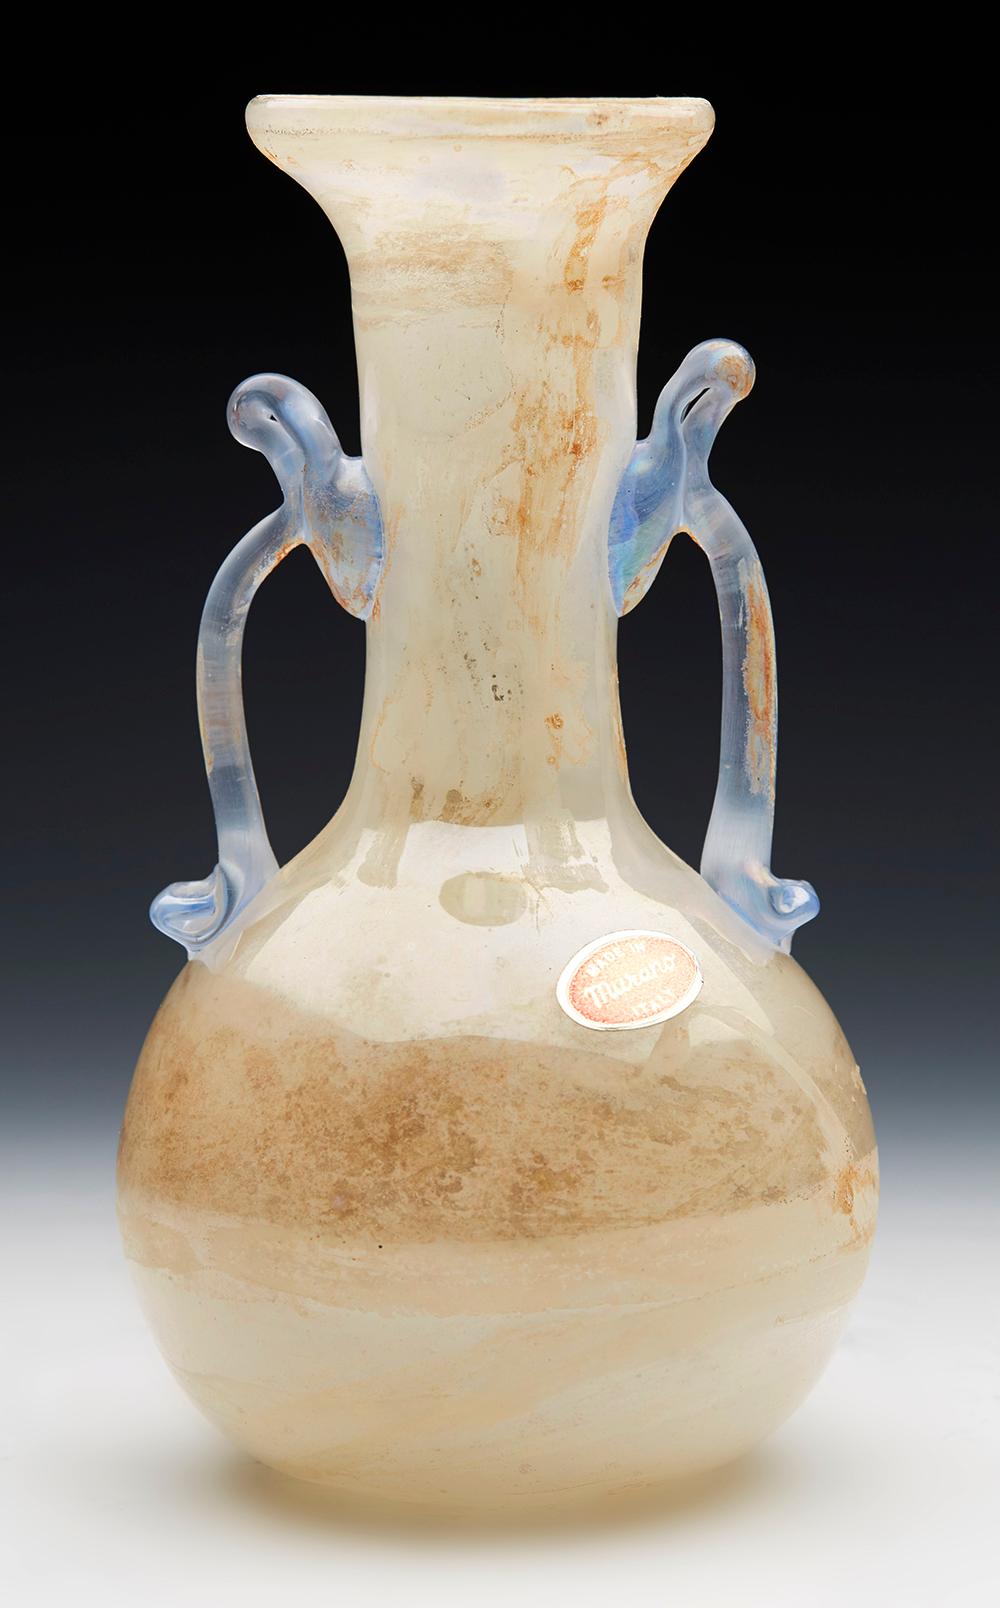 A very stylish midcentury Italian Murano Scavo (excavated) art glass twin handled vase attributed to Gino Cenedese (Italian, 1907-1973) and dating from around 1960. The vase of bottle or flask shape with applied handles to either side is hand blown